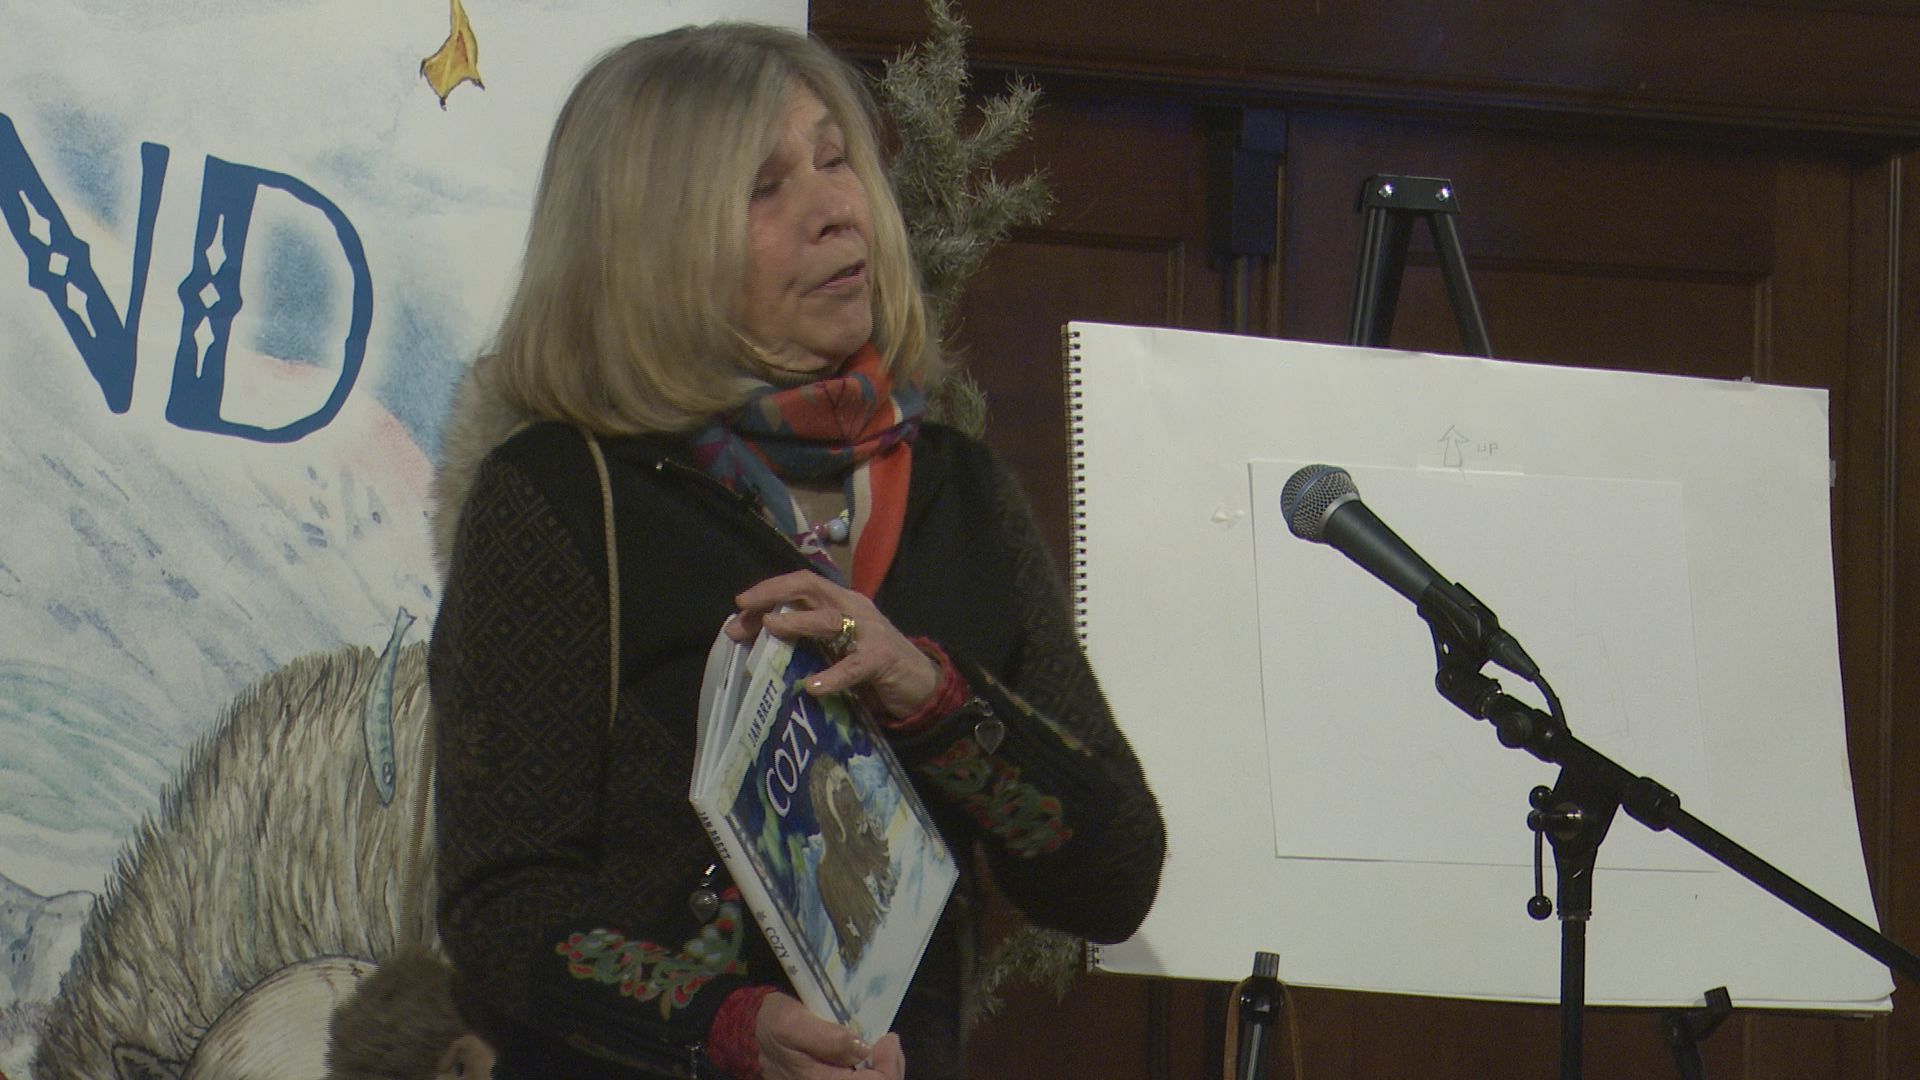 Nationally known children’s book author Jan Brett makes tour stop in Wausau